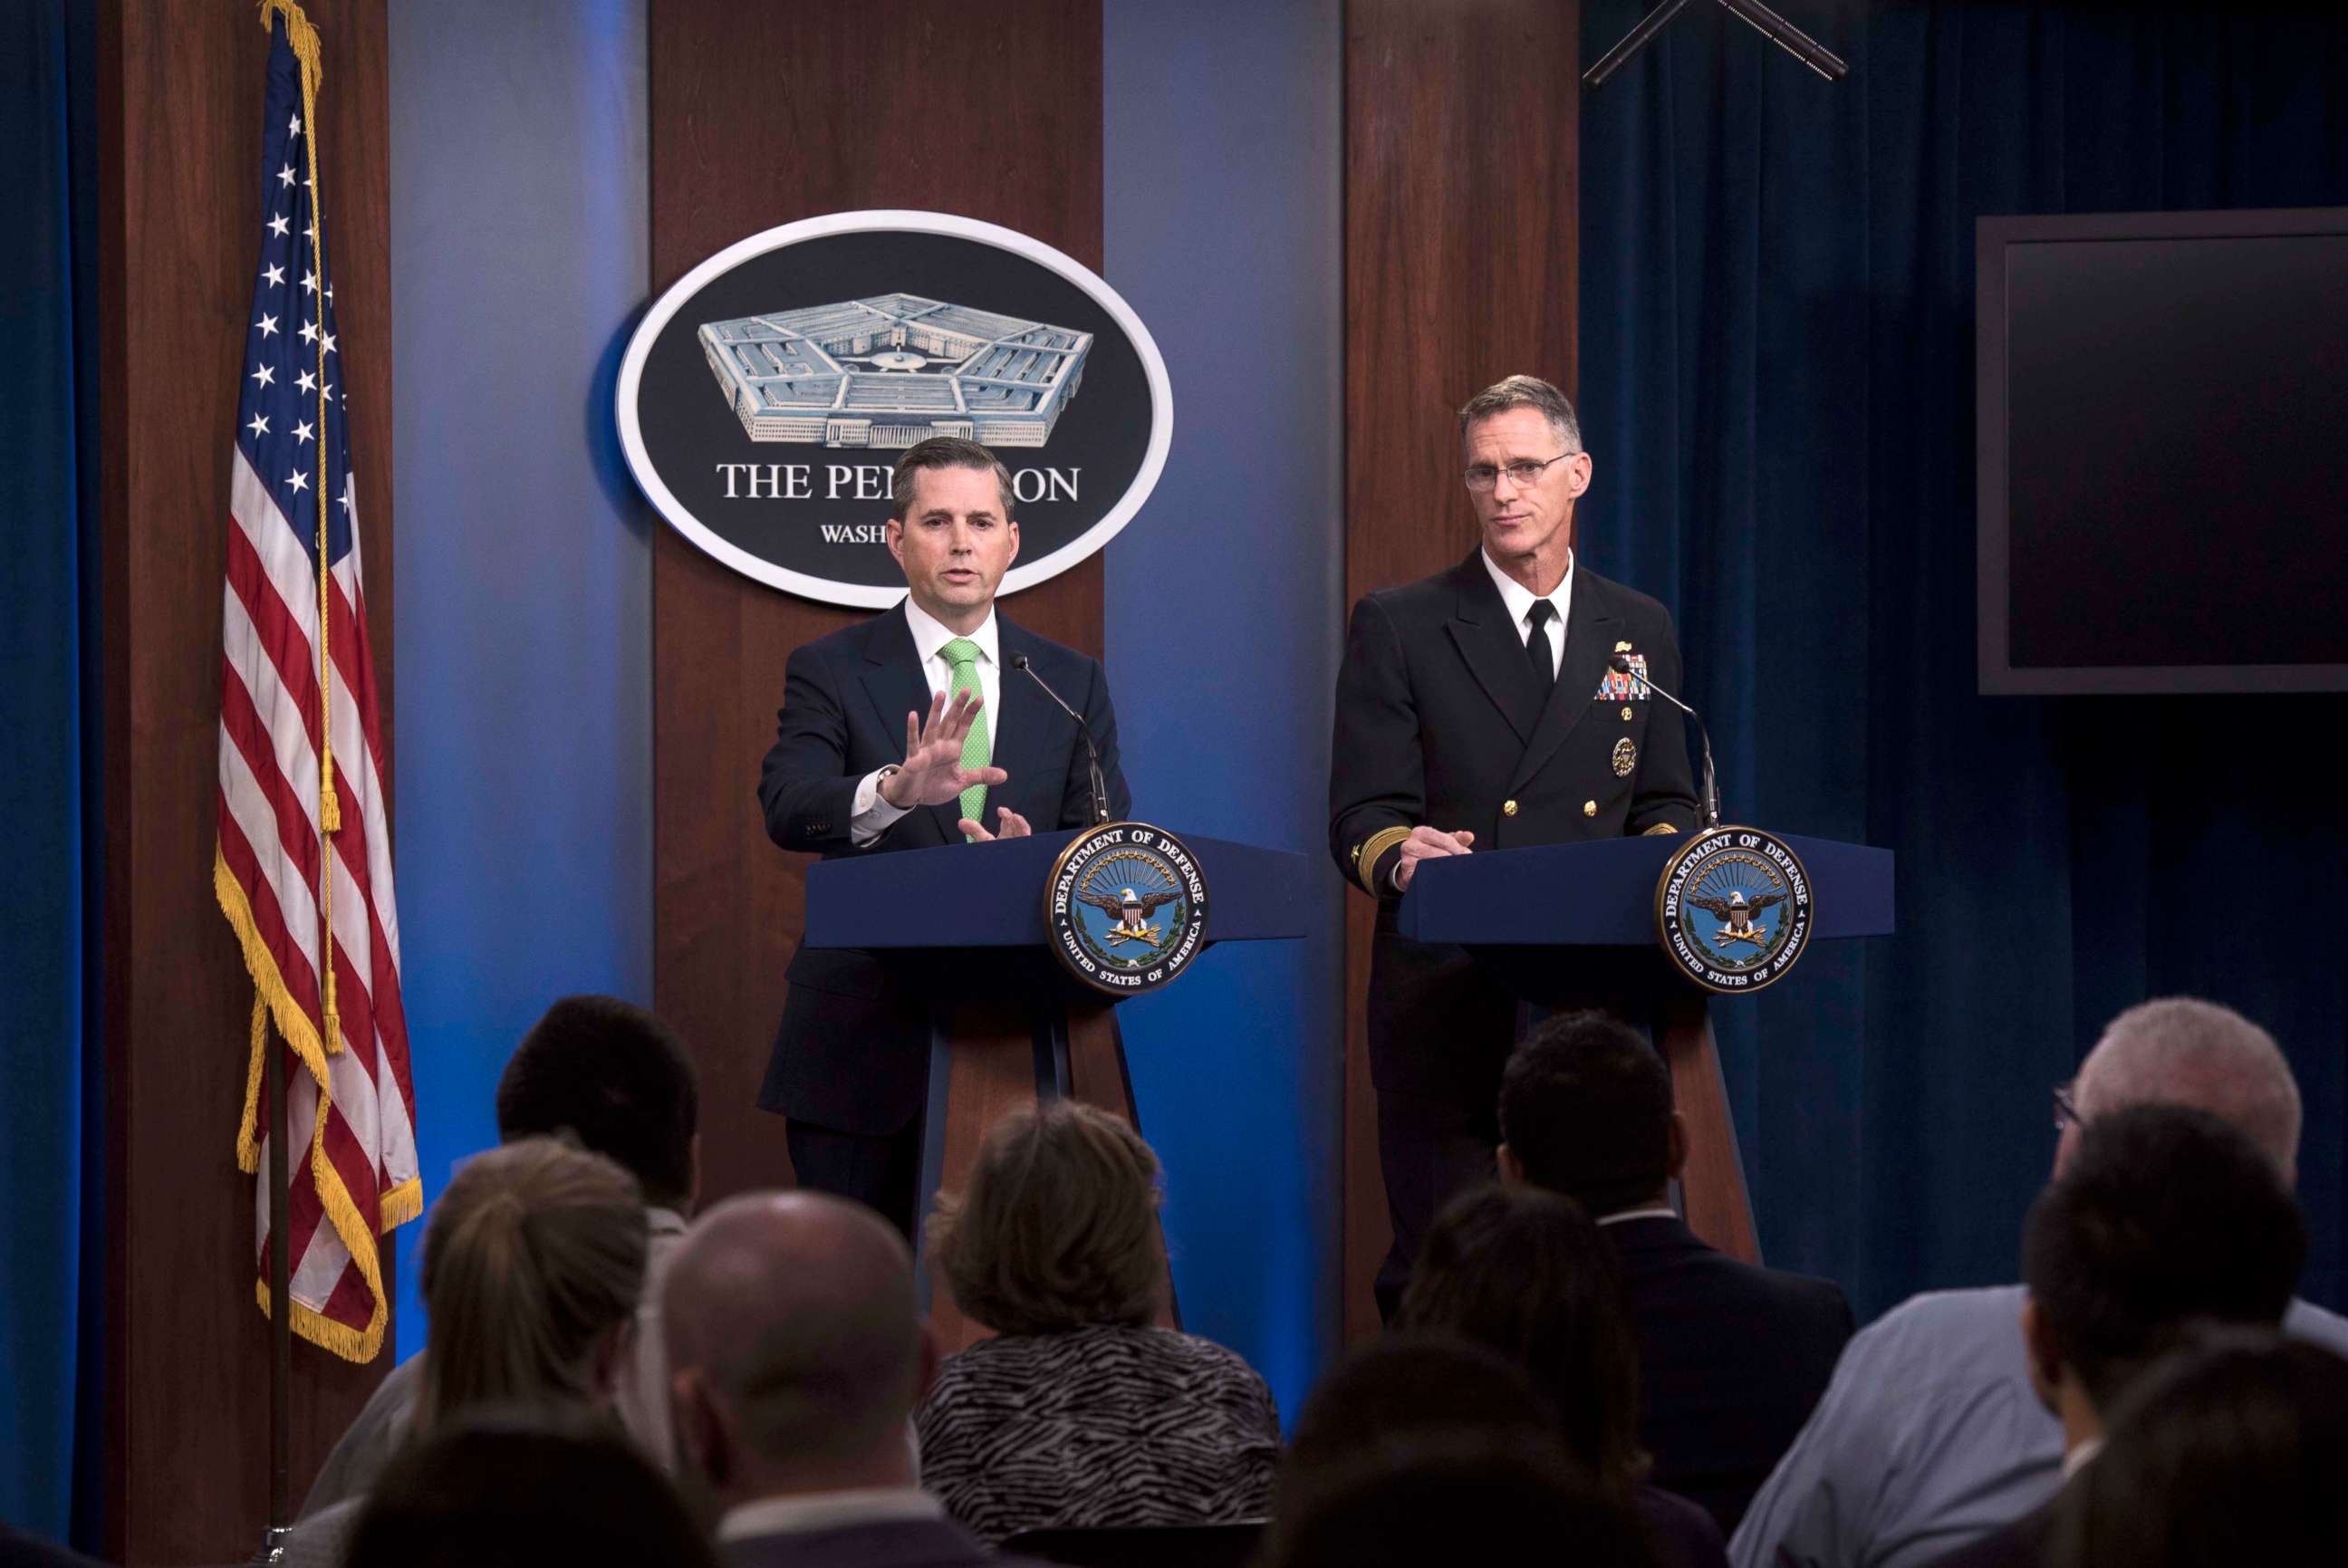 PHOTO: Assistant to the Secretary of Defense for Public Affairs Jonathan Rath Hoffman and Navy Rear Adm. William D. Byrne Jr., Joint Staff vice director, respond to questions at a news conference at the Pentagon, Washington, D.C., Nov. 7, 2019.